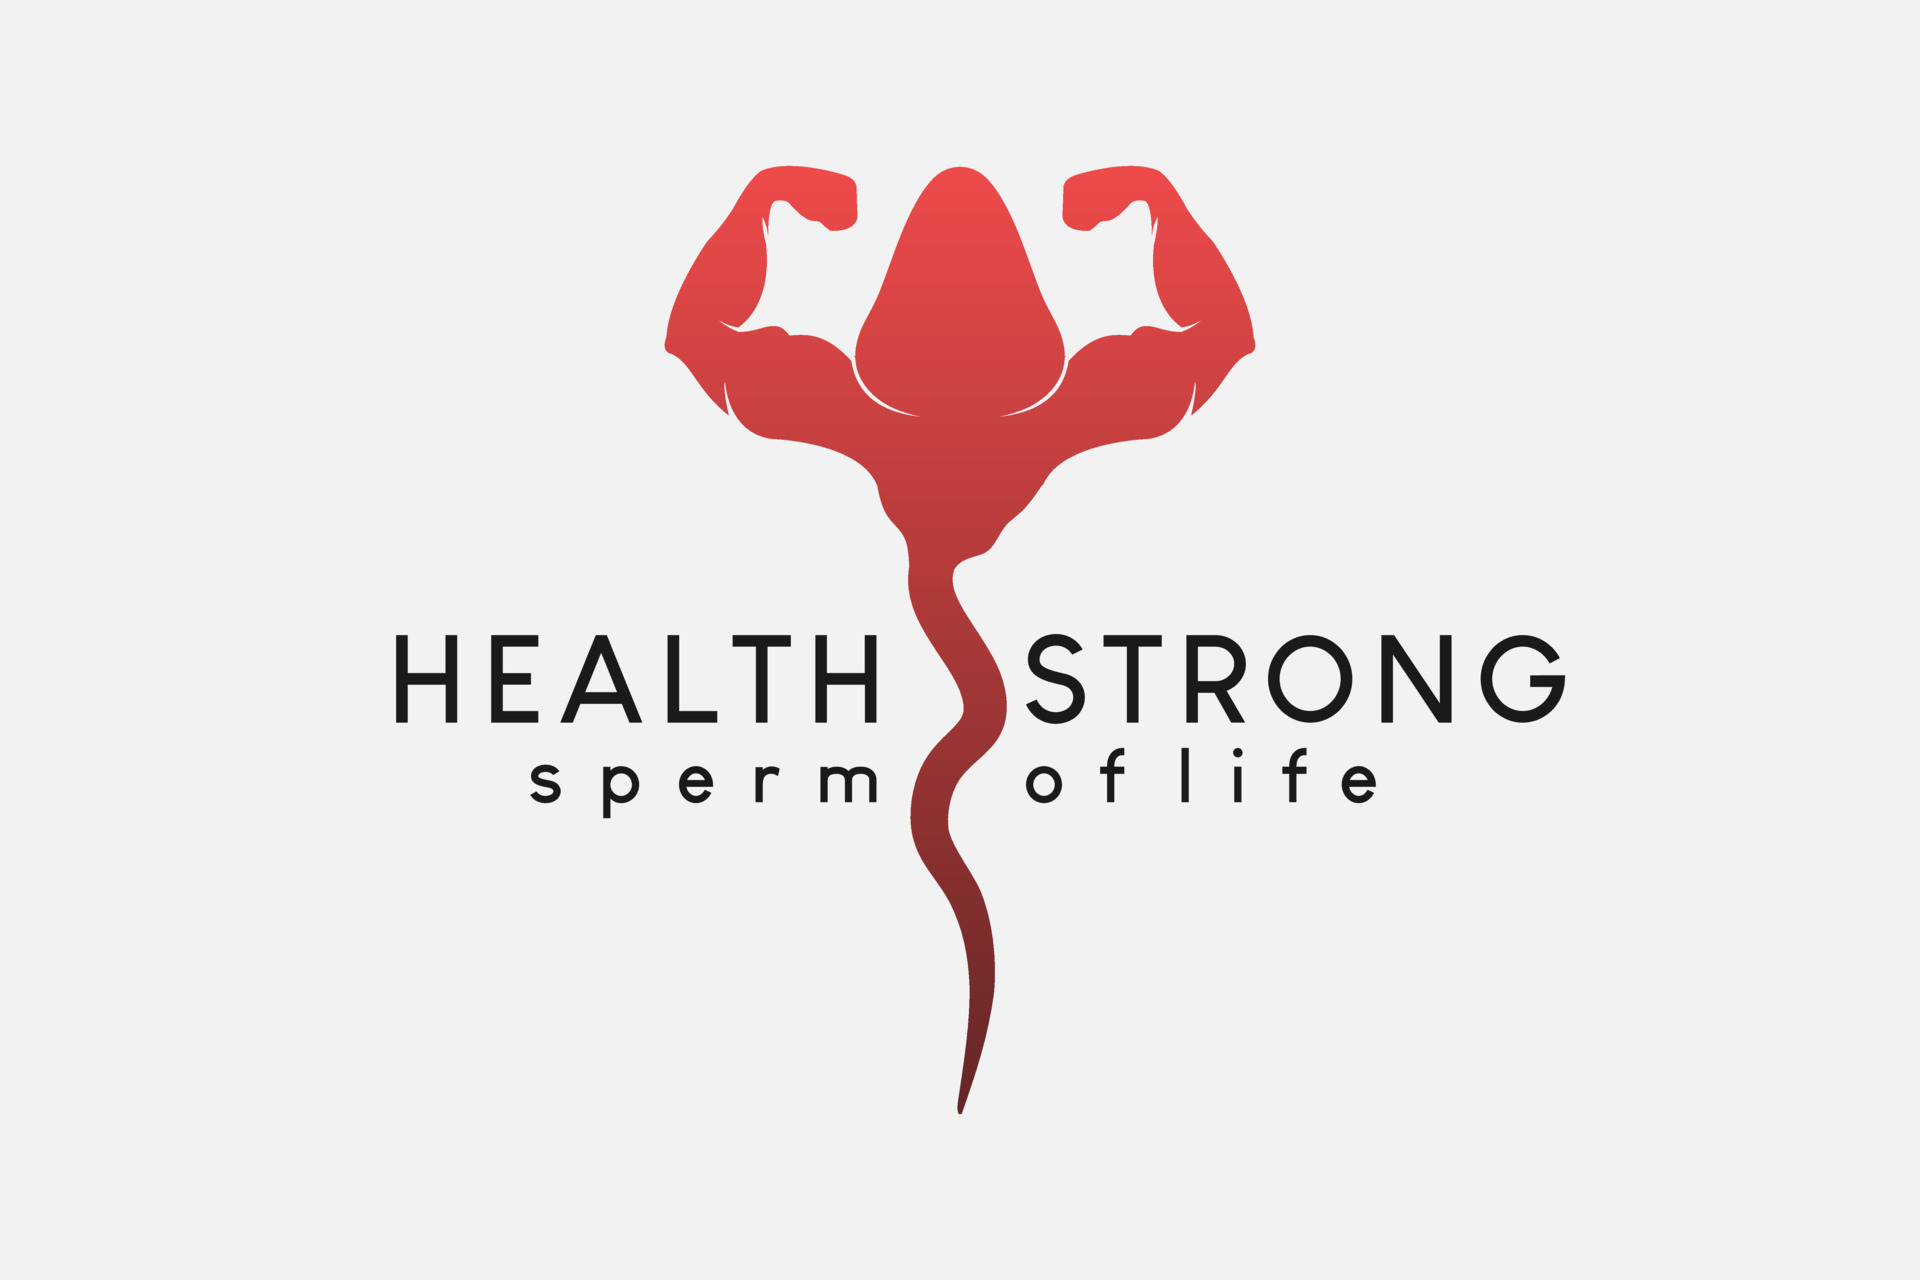 sperm-logo-design-sperm-icon-combined-with-a-muscular-hand-icon-in-a-creative-concept-premium-illustration-vector